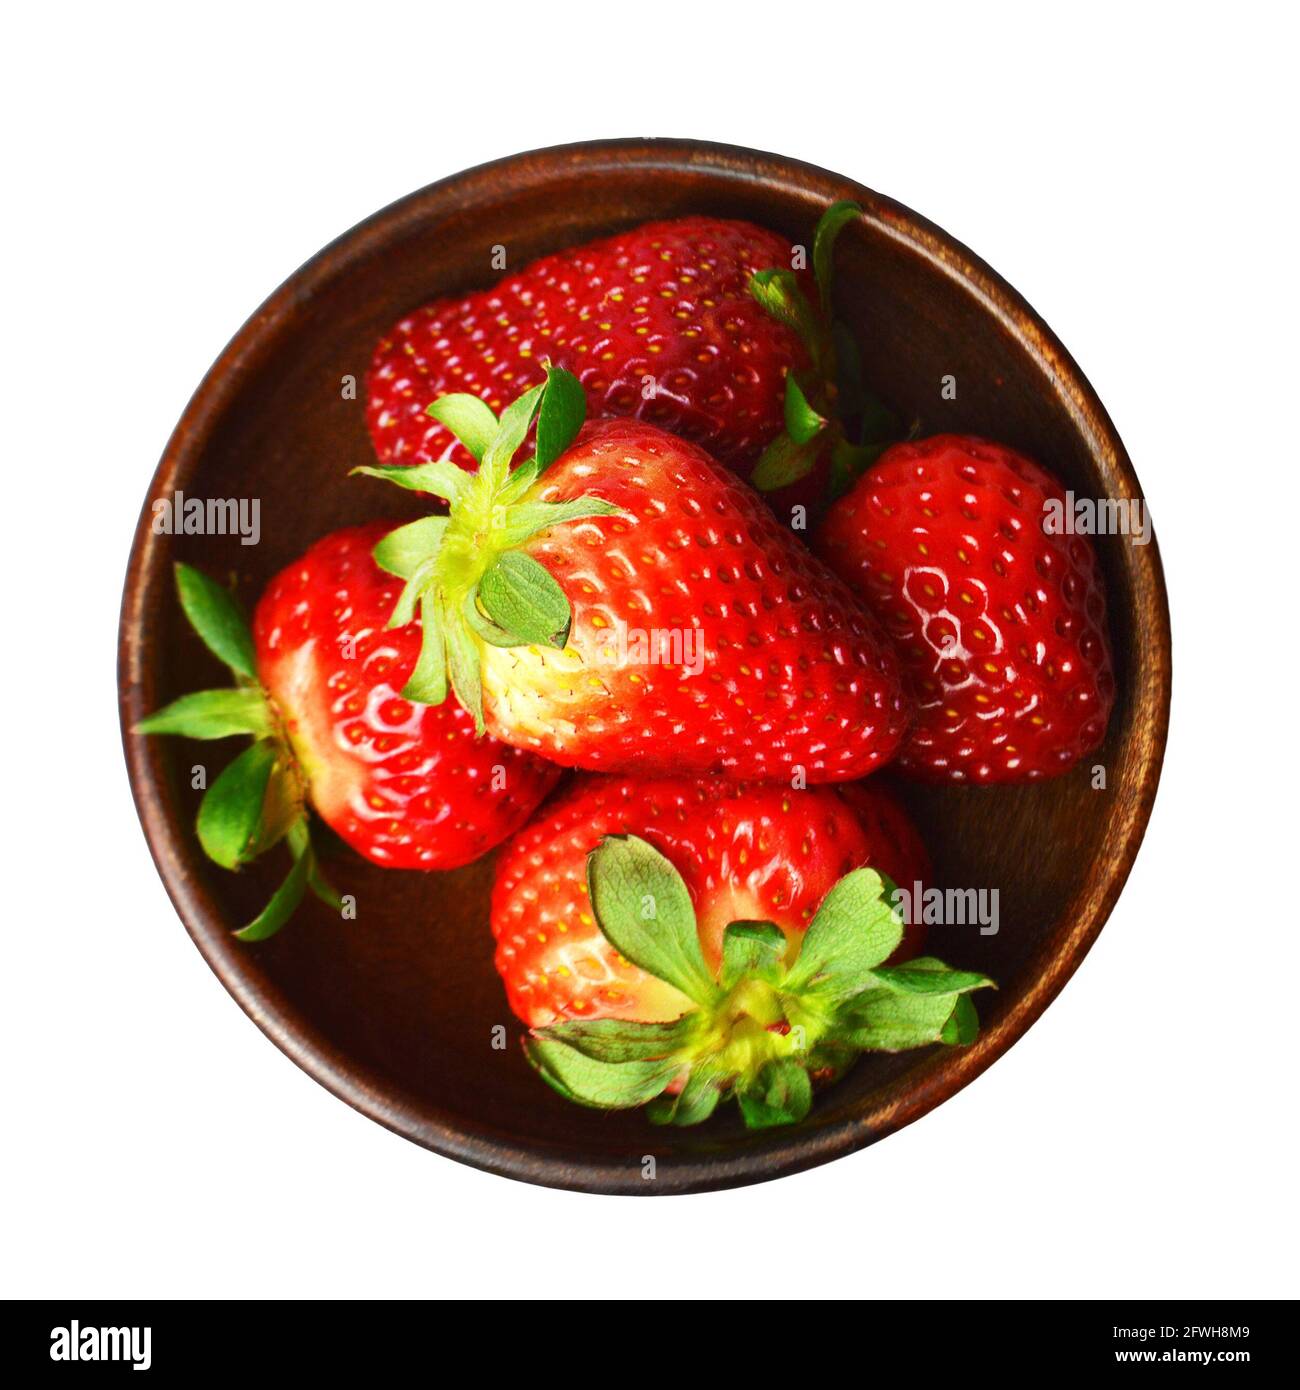 Strawberries in a bowl isolated on white background Stock Photo